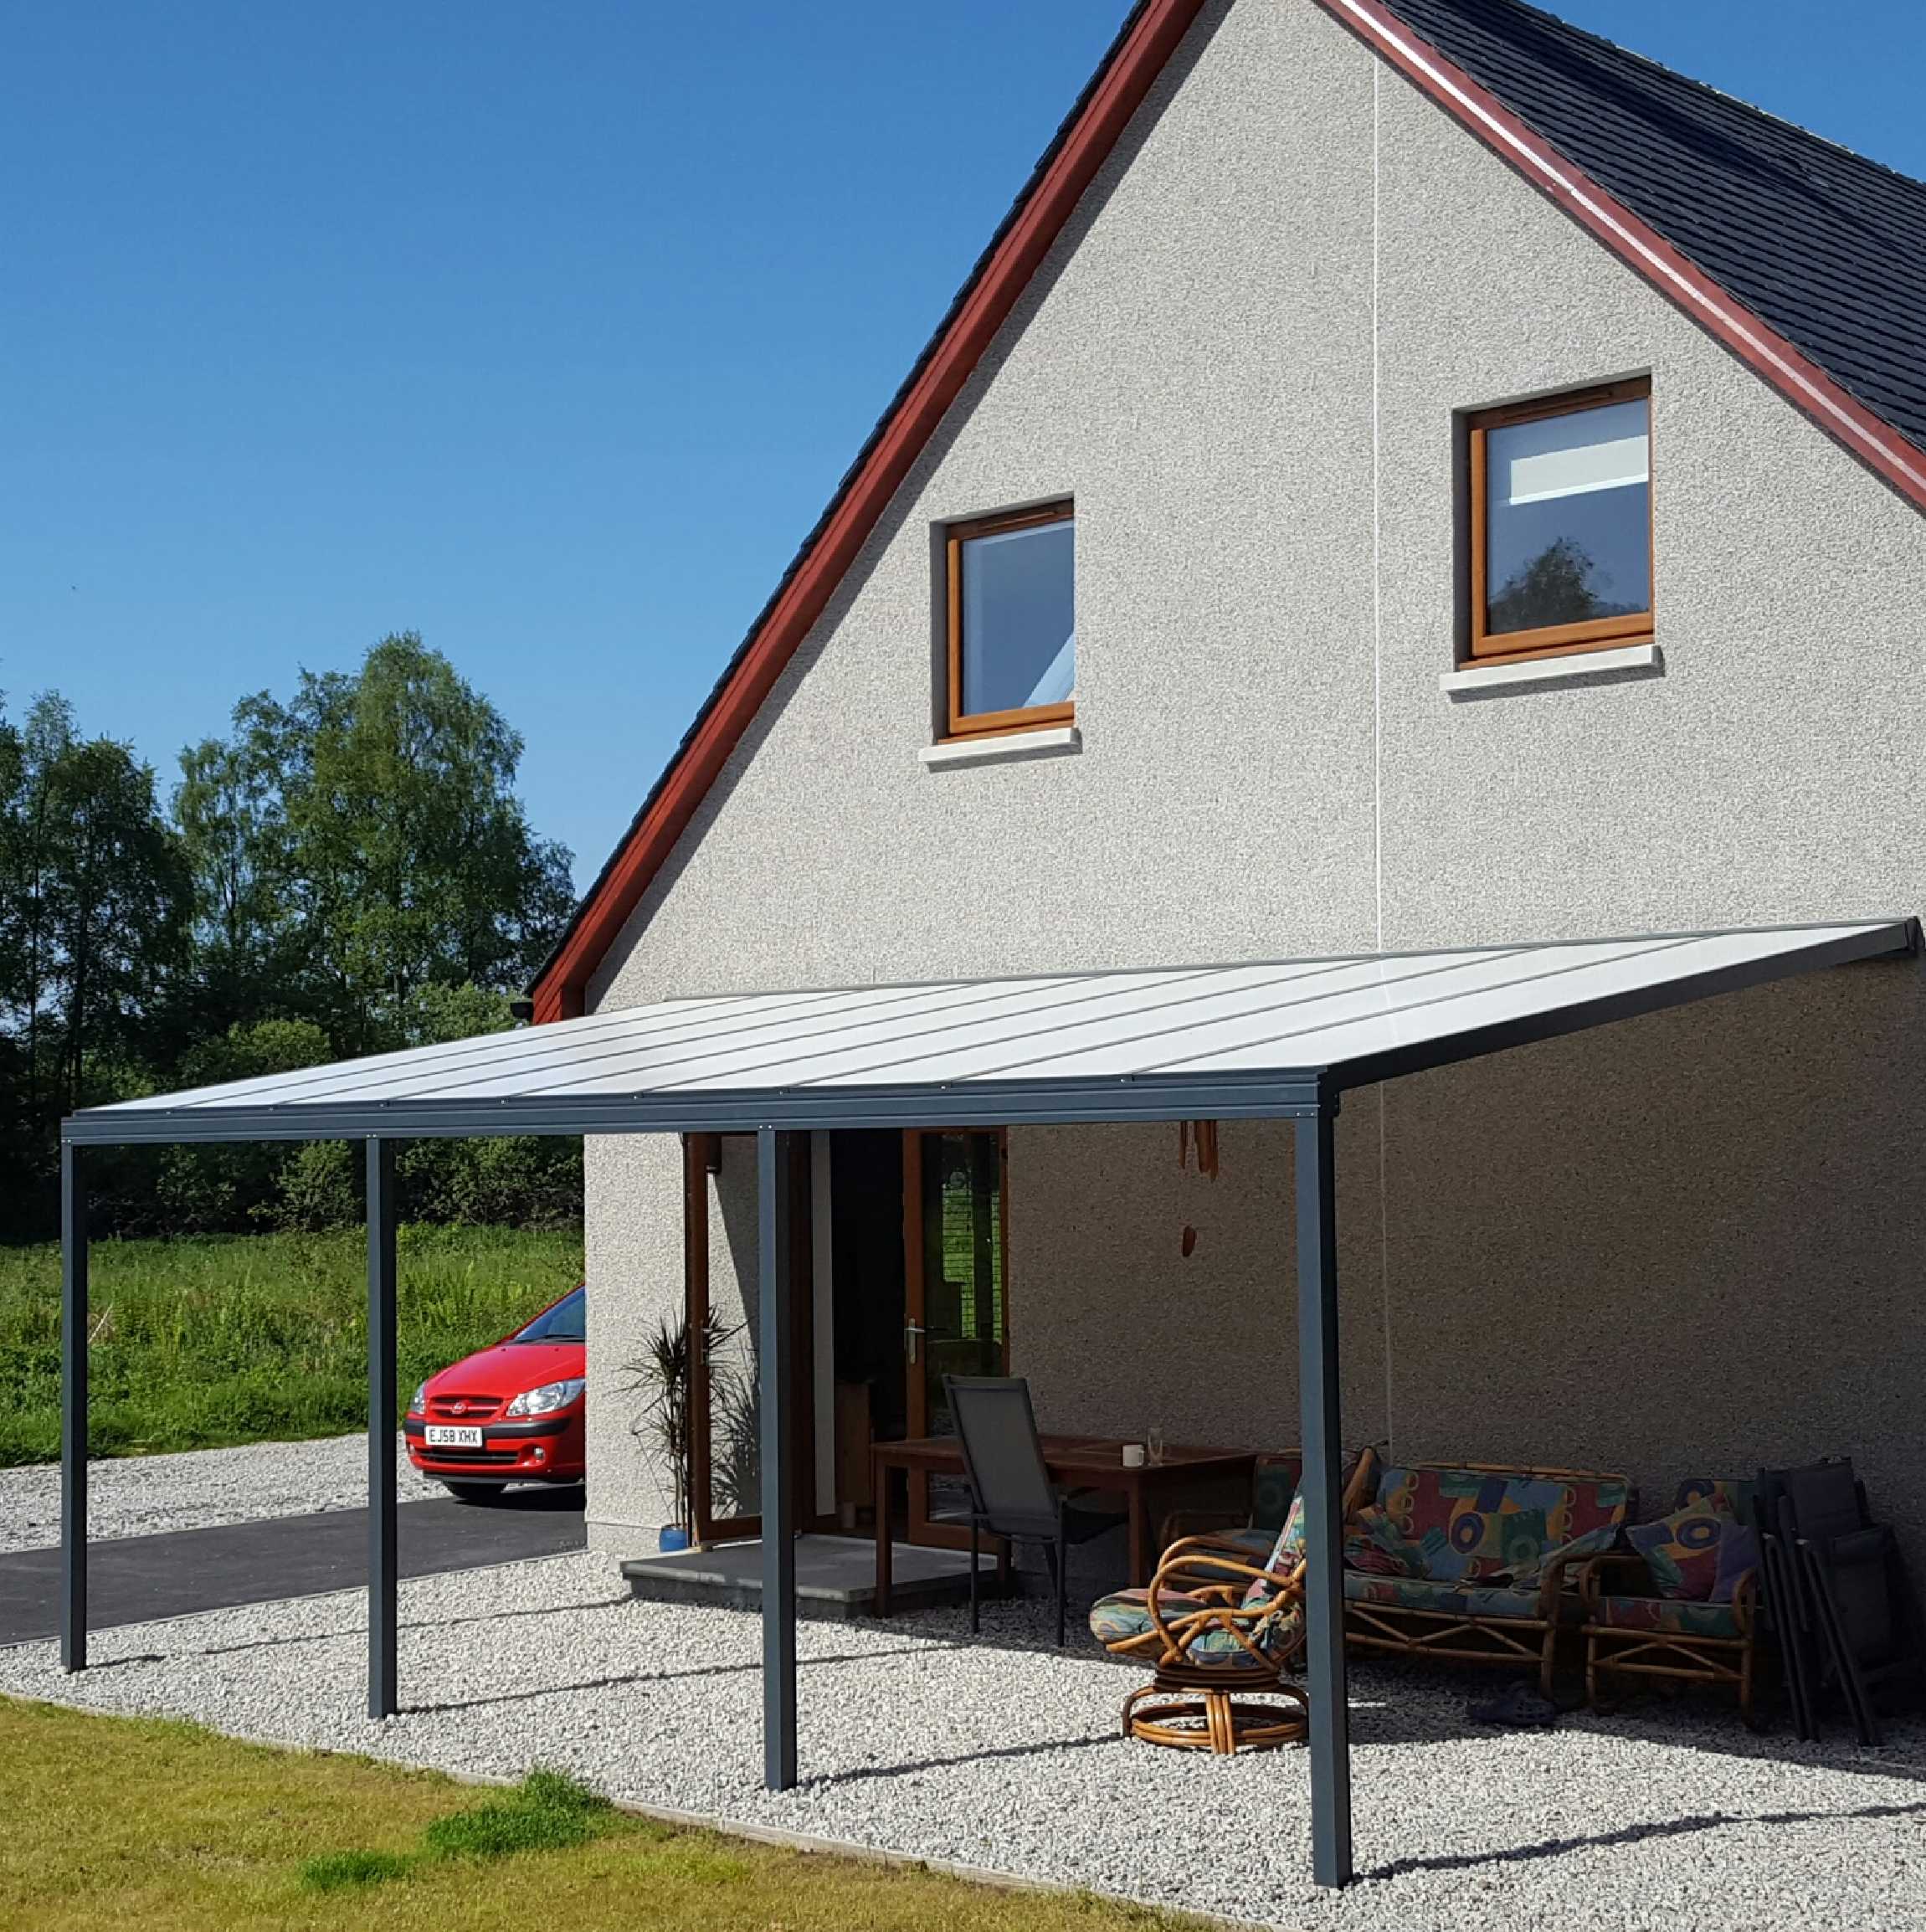 Great selection of Omega Smart Lean-To Canopy, Anthracite Grey, 16mm Polycarbonate Glazing - 5.2m (W) x 3.0m (P), (3) Supporting Posts